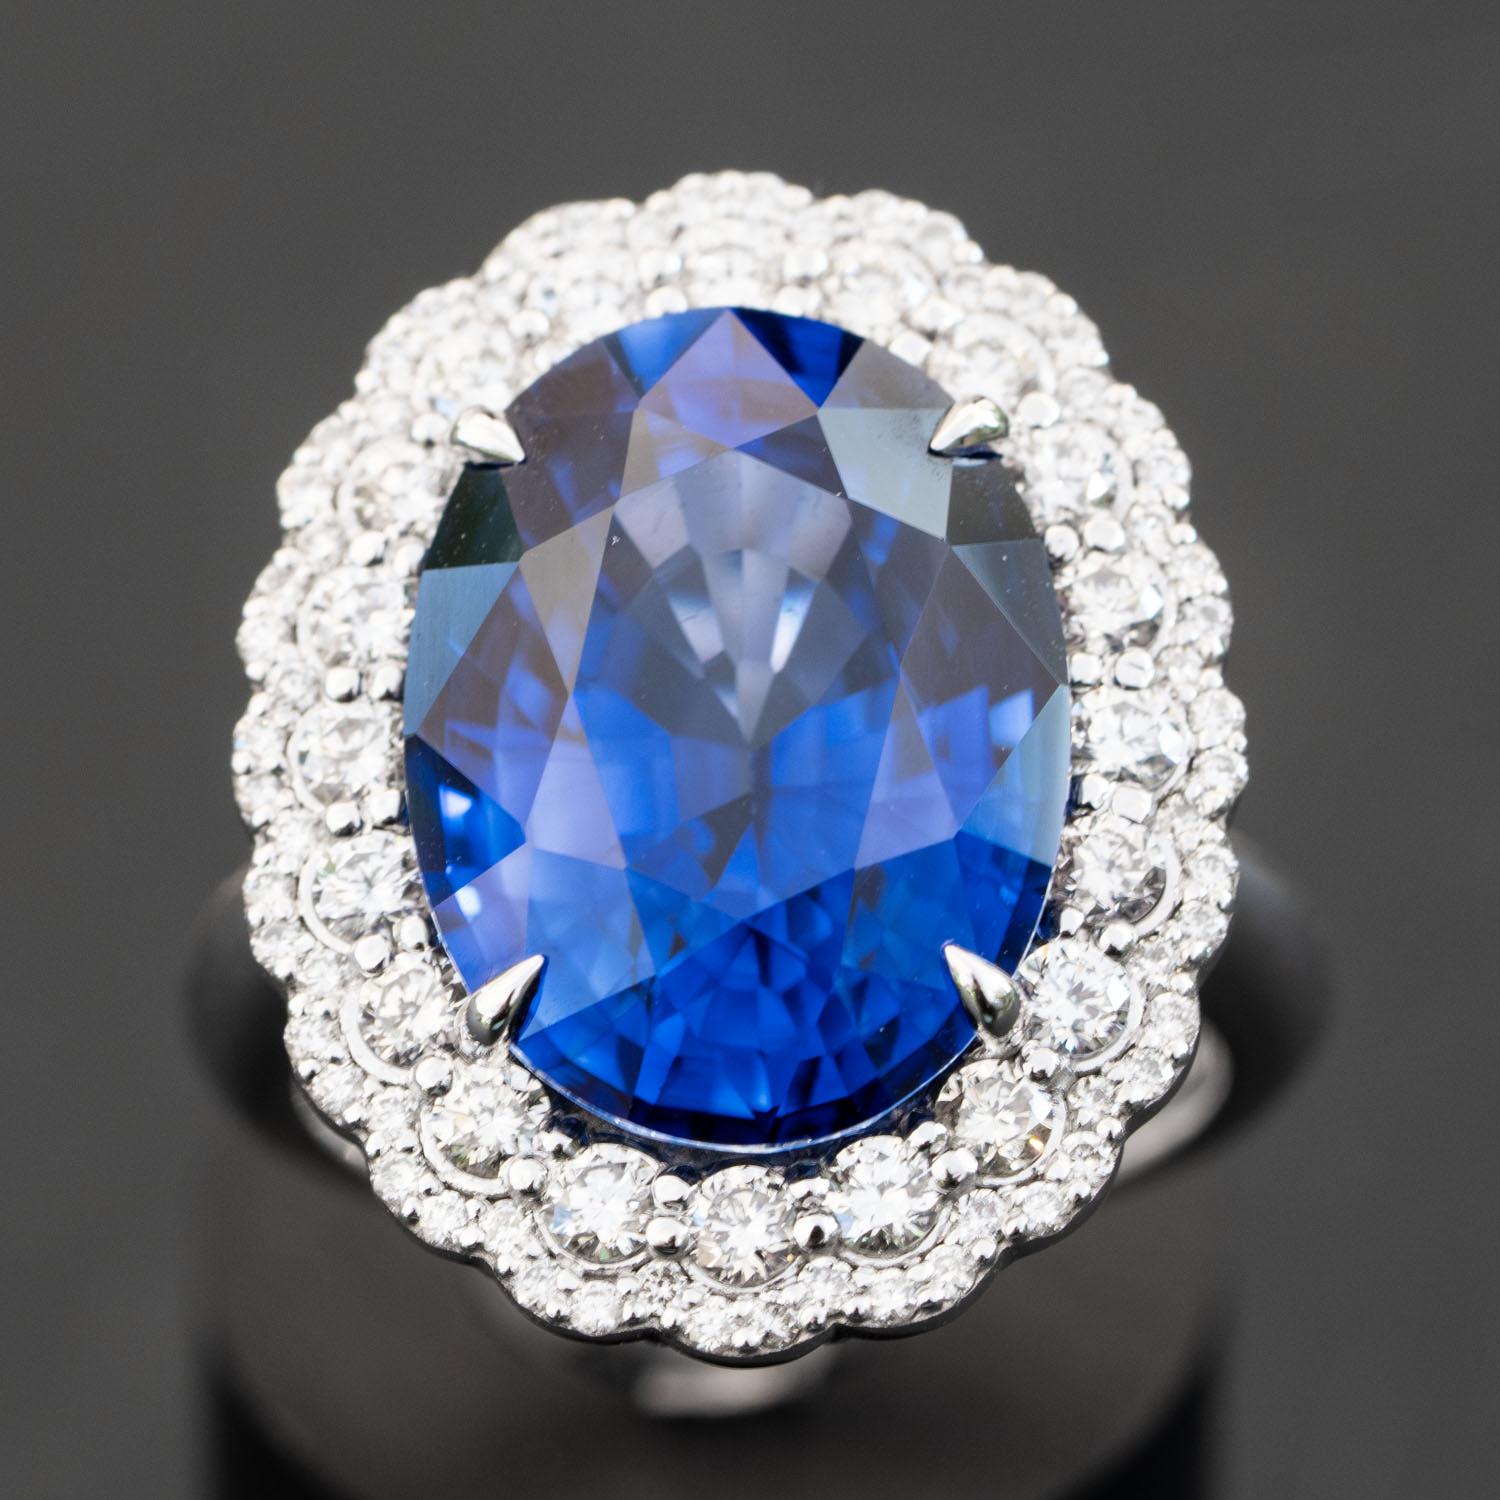 This gorgeous blue sapphire ring will impress everyone around you. It features a large oval 13.50 carat gemstone, adorned with 1.01 carat natural diamonds.

Diffused Sapphire
Oval Sapphire                                                             